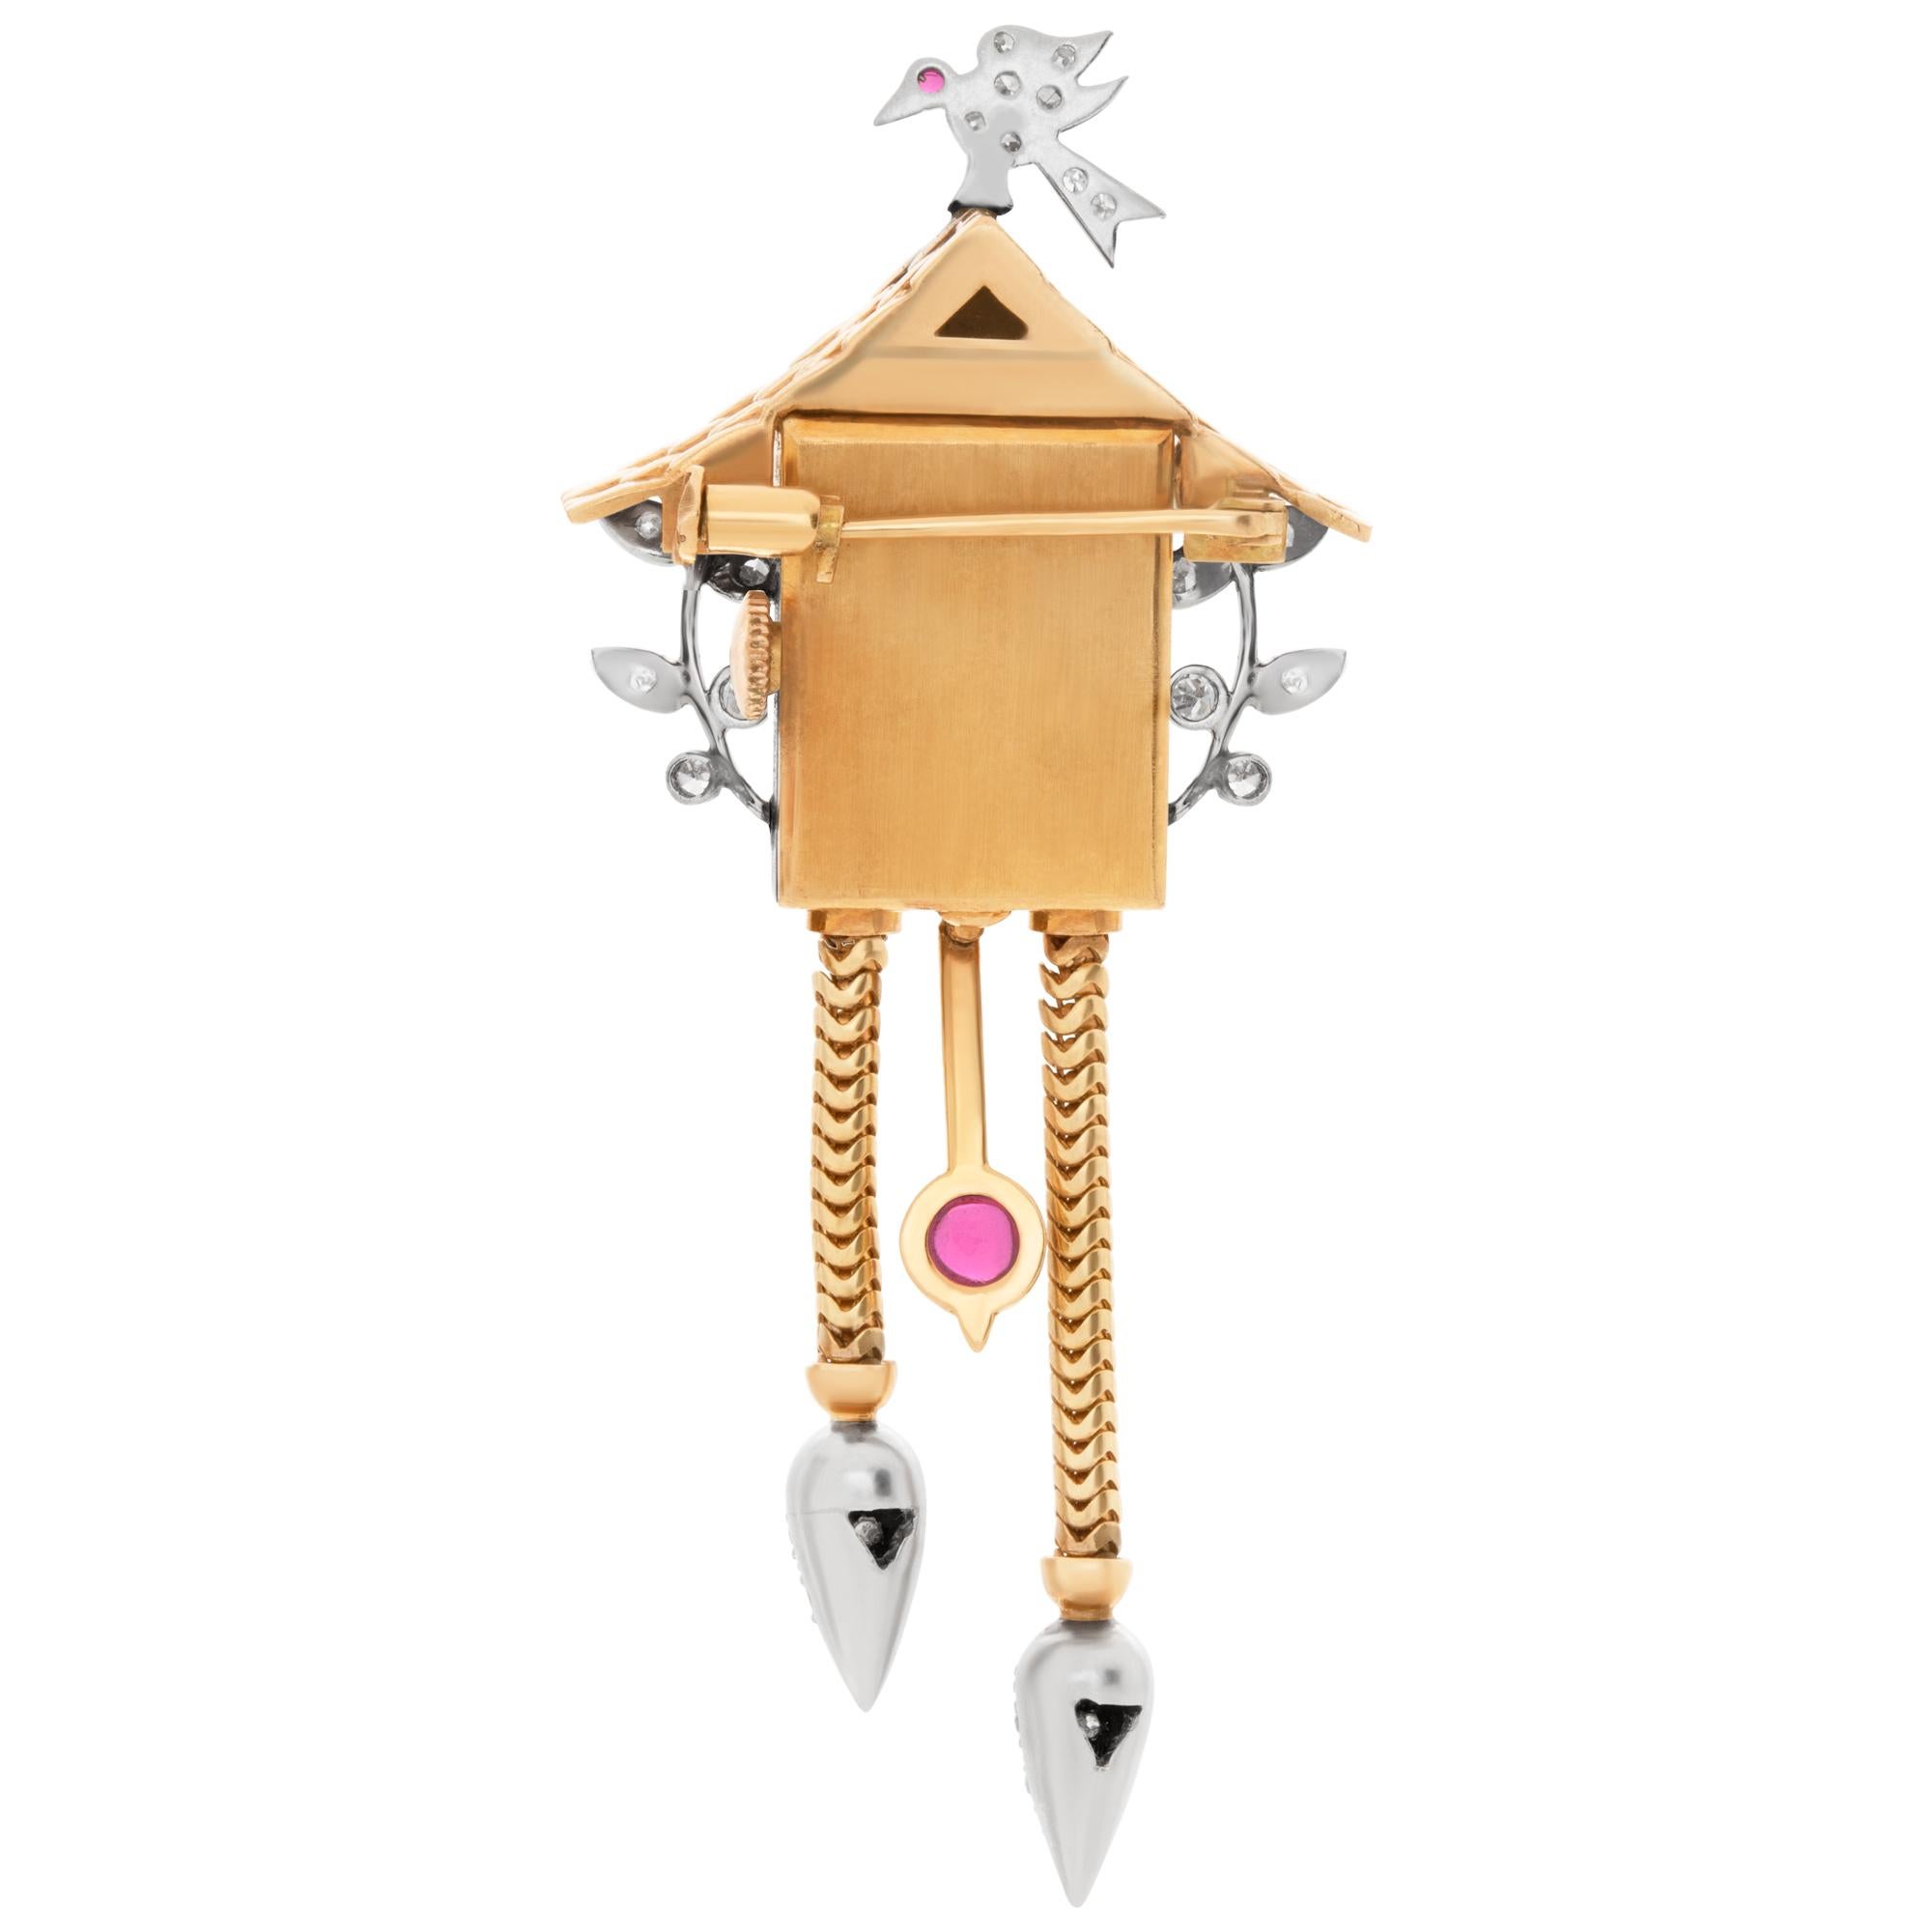 Omega Birdhouse brooch in 14k gold and diamonds In Excellent Condition For Sale In Surfside, FL